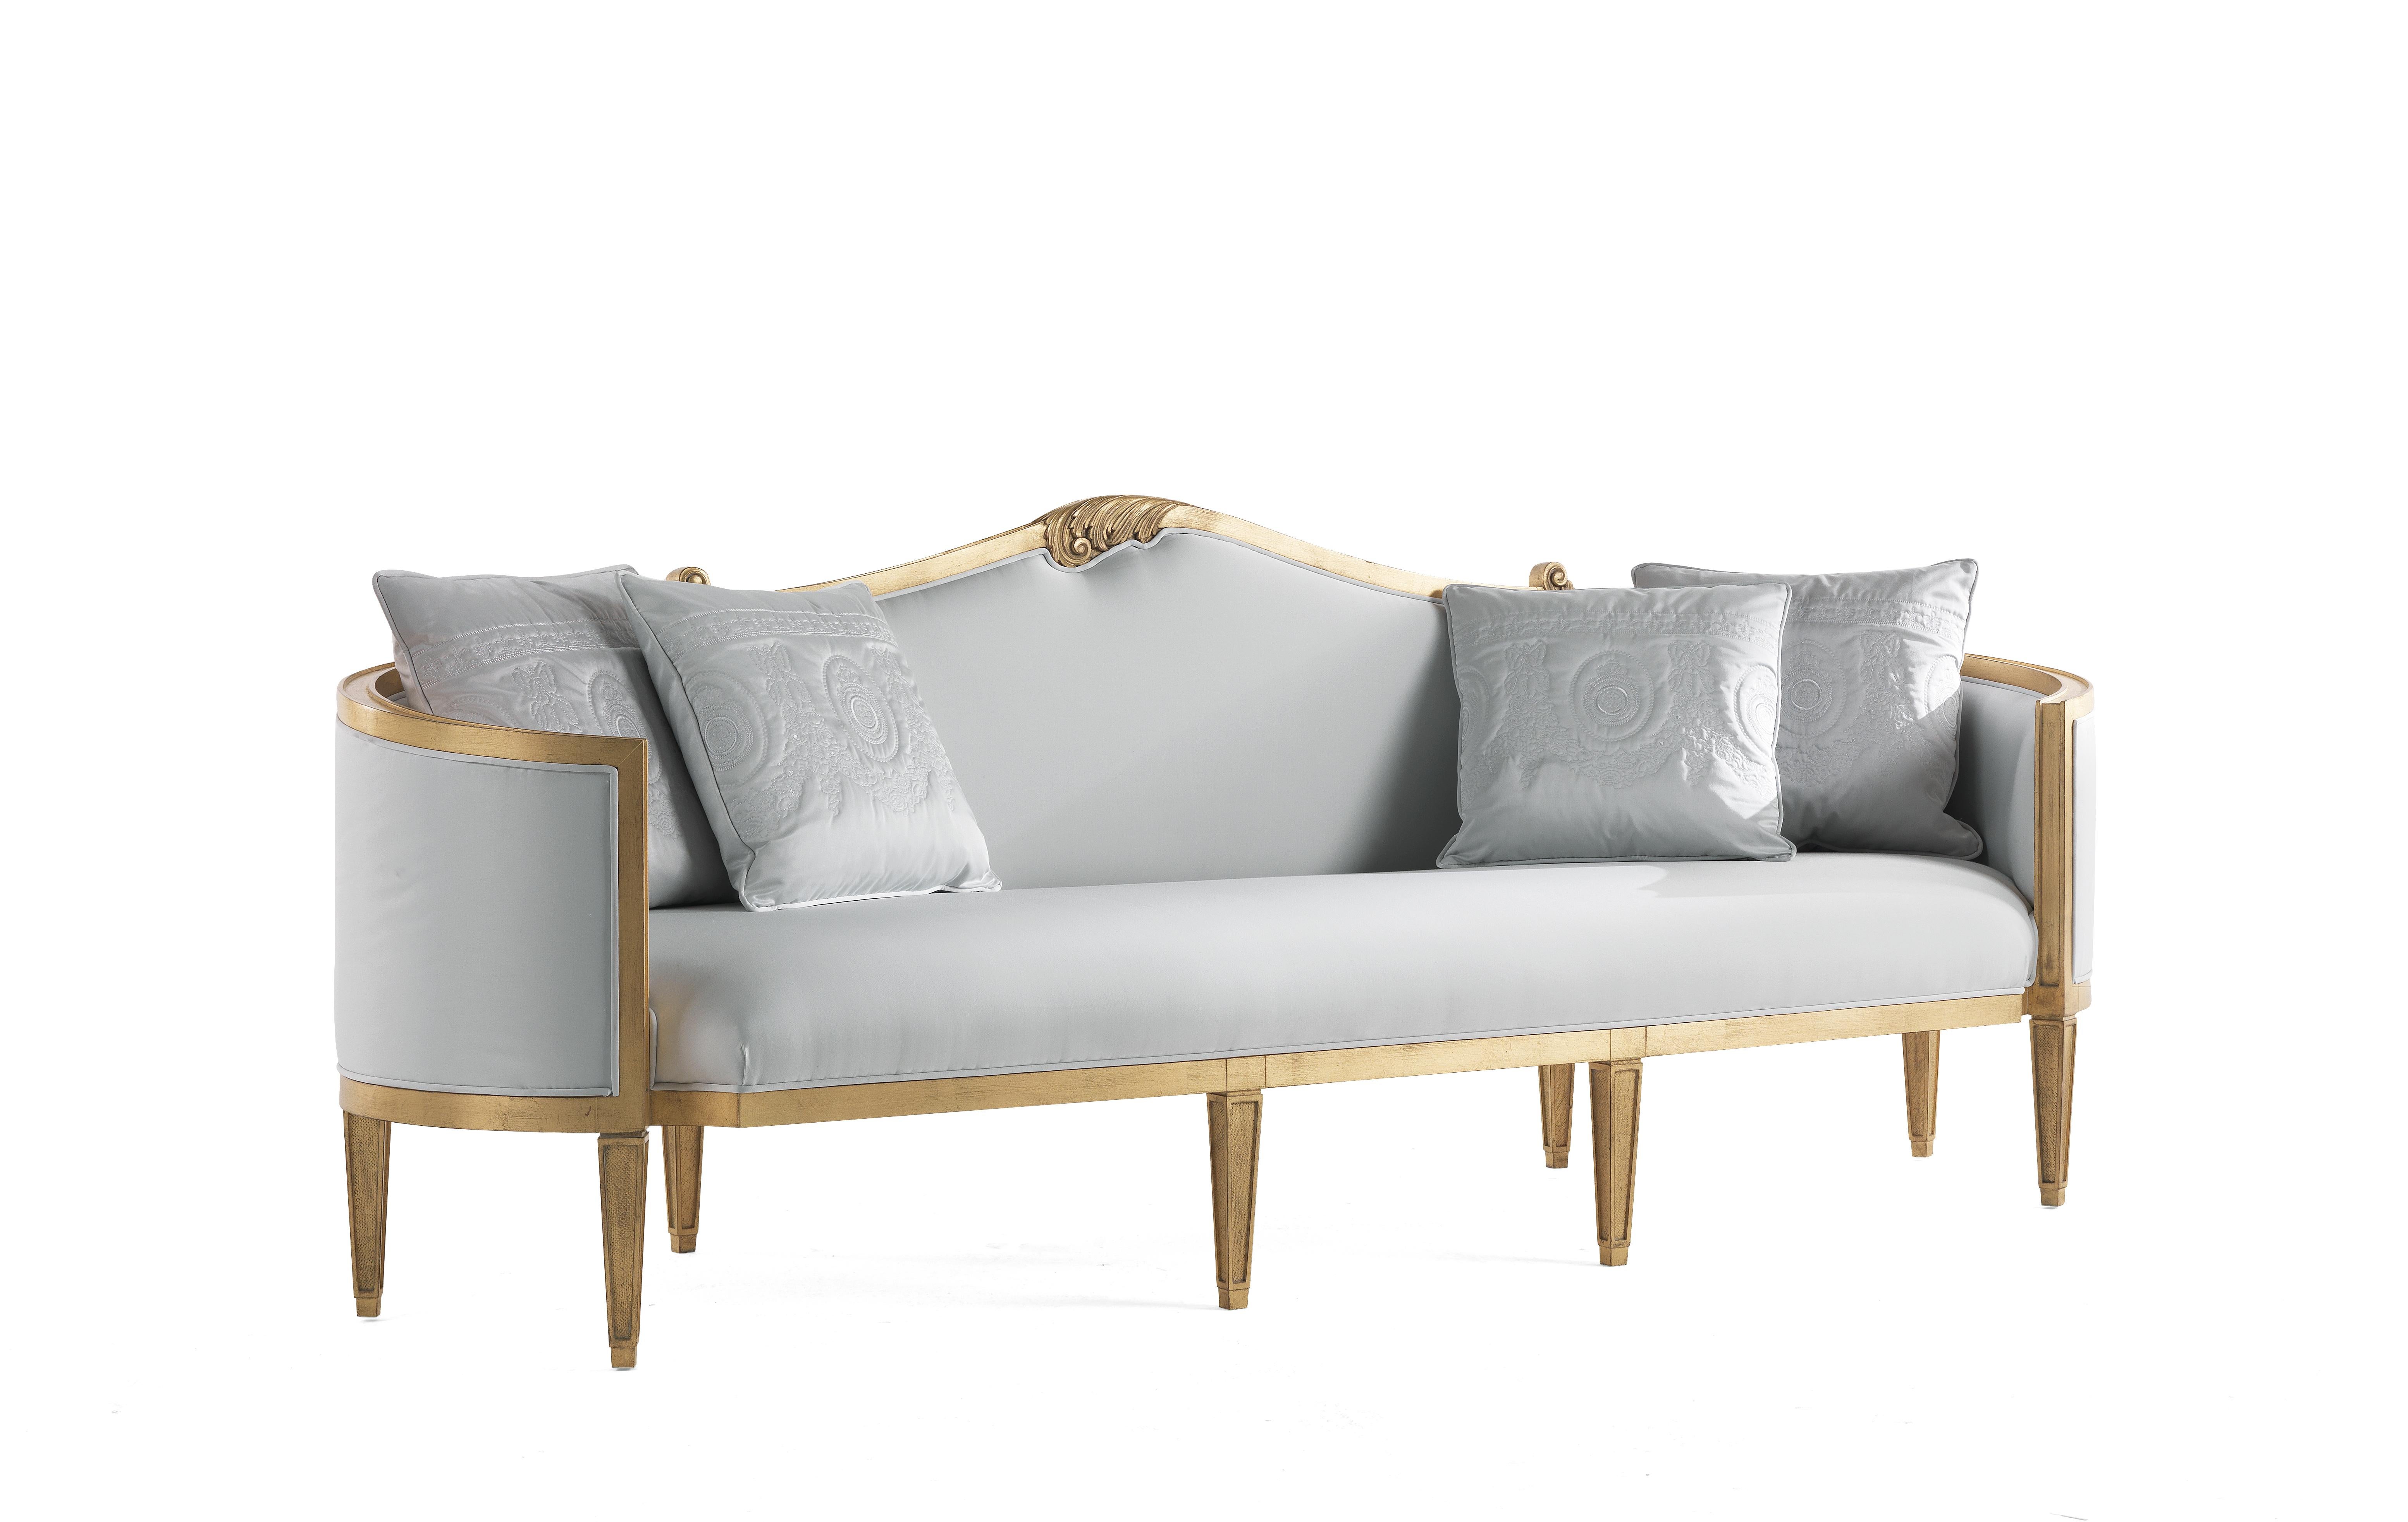 A scenographic piece of furniture, designed to be the protagonist of any environment and characterized by an antique gold frame and a precious and refined light-grey satin upholstery.
Annecy loveseat with structure in hand-carved solid beechwood